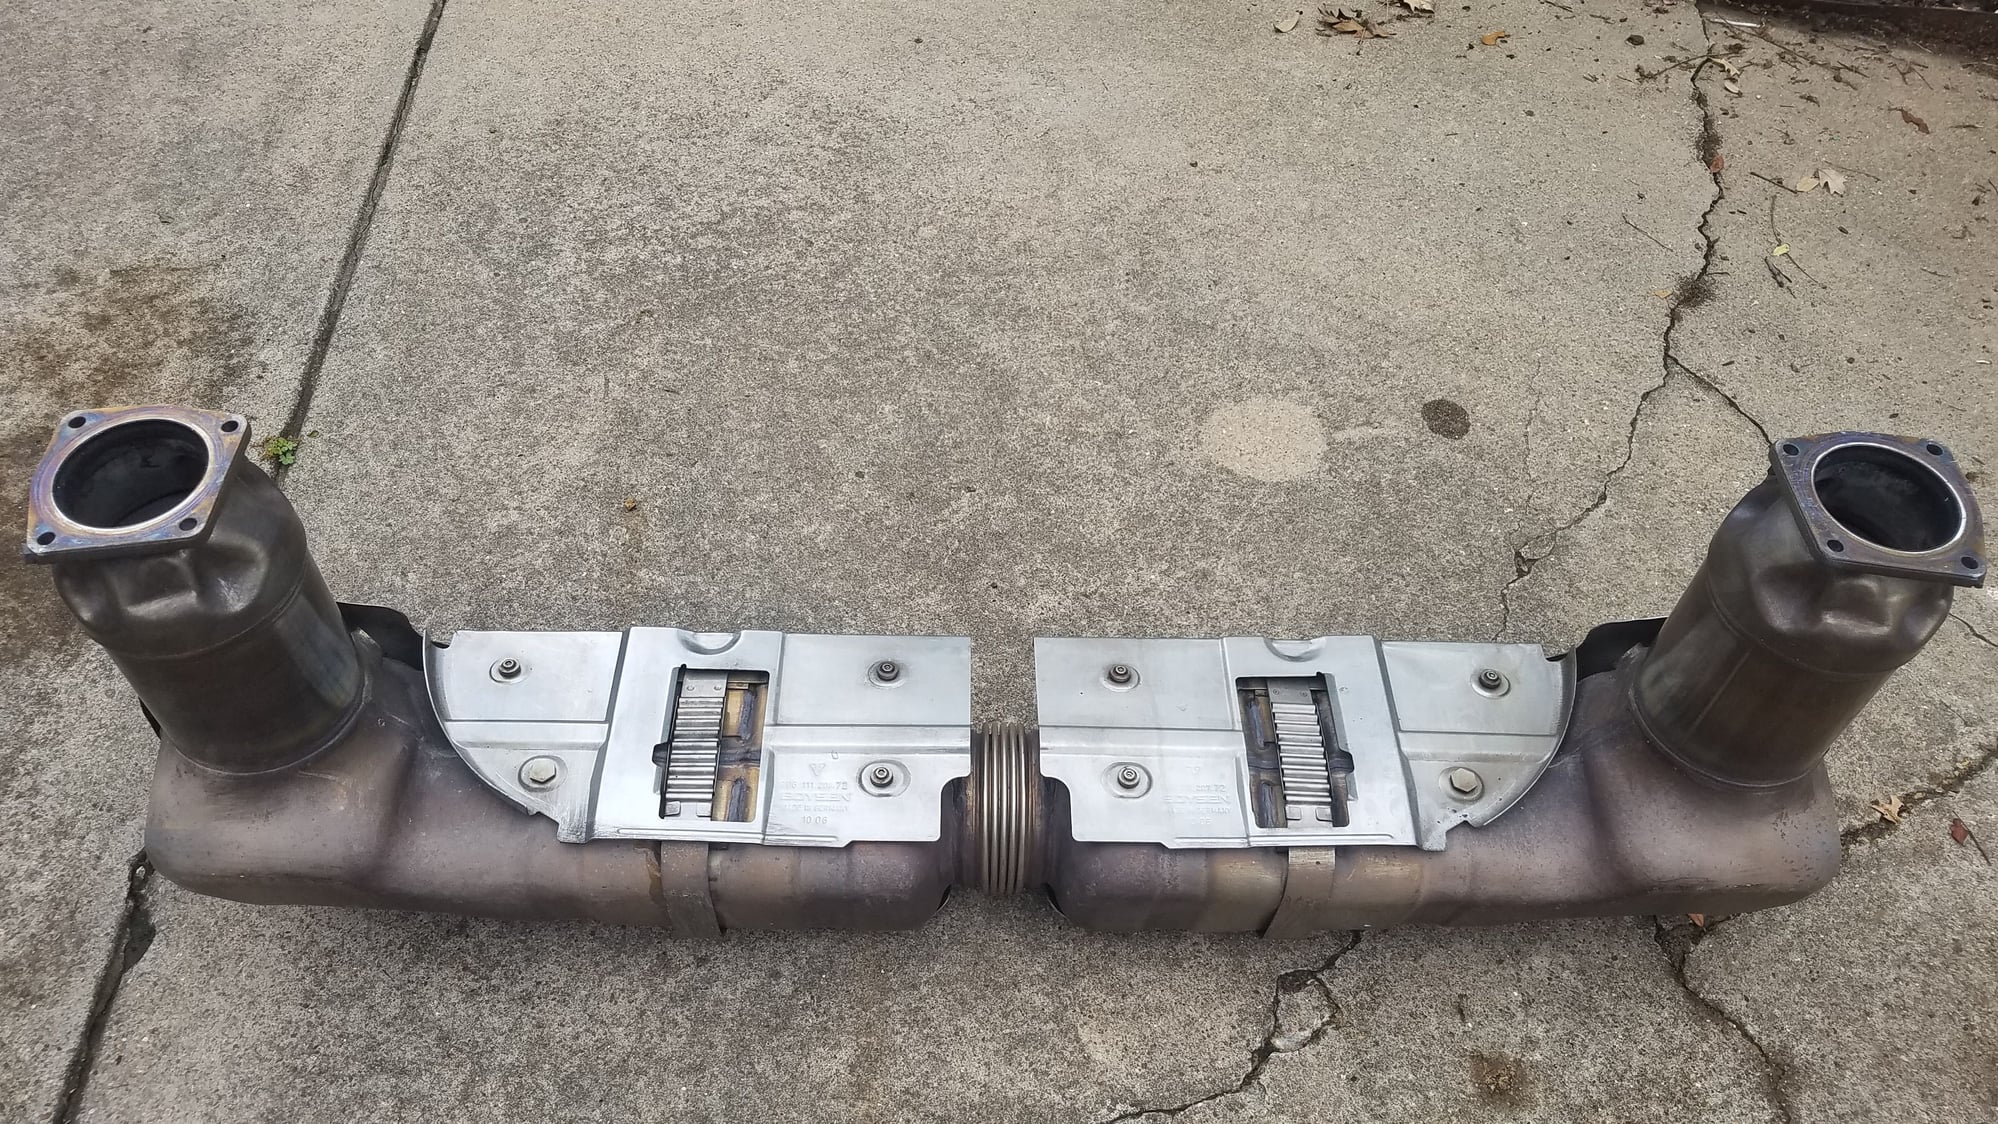 Engine - Exhaust - Stock OEM Exhaust for 997TT 911 turbo - Used - 2007 to 2009 Porsche 911 - Ft Worth, TX 76110, United States